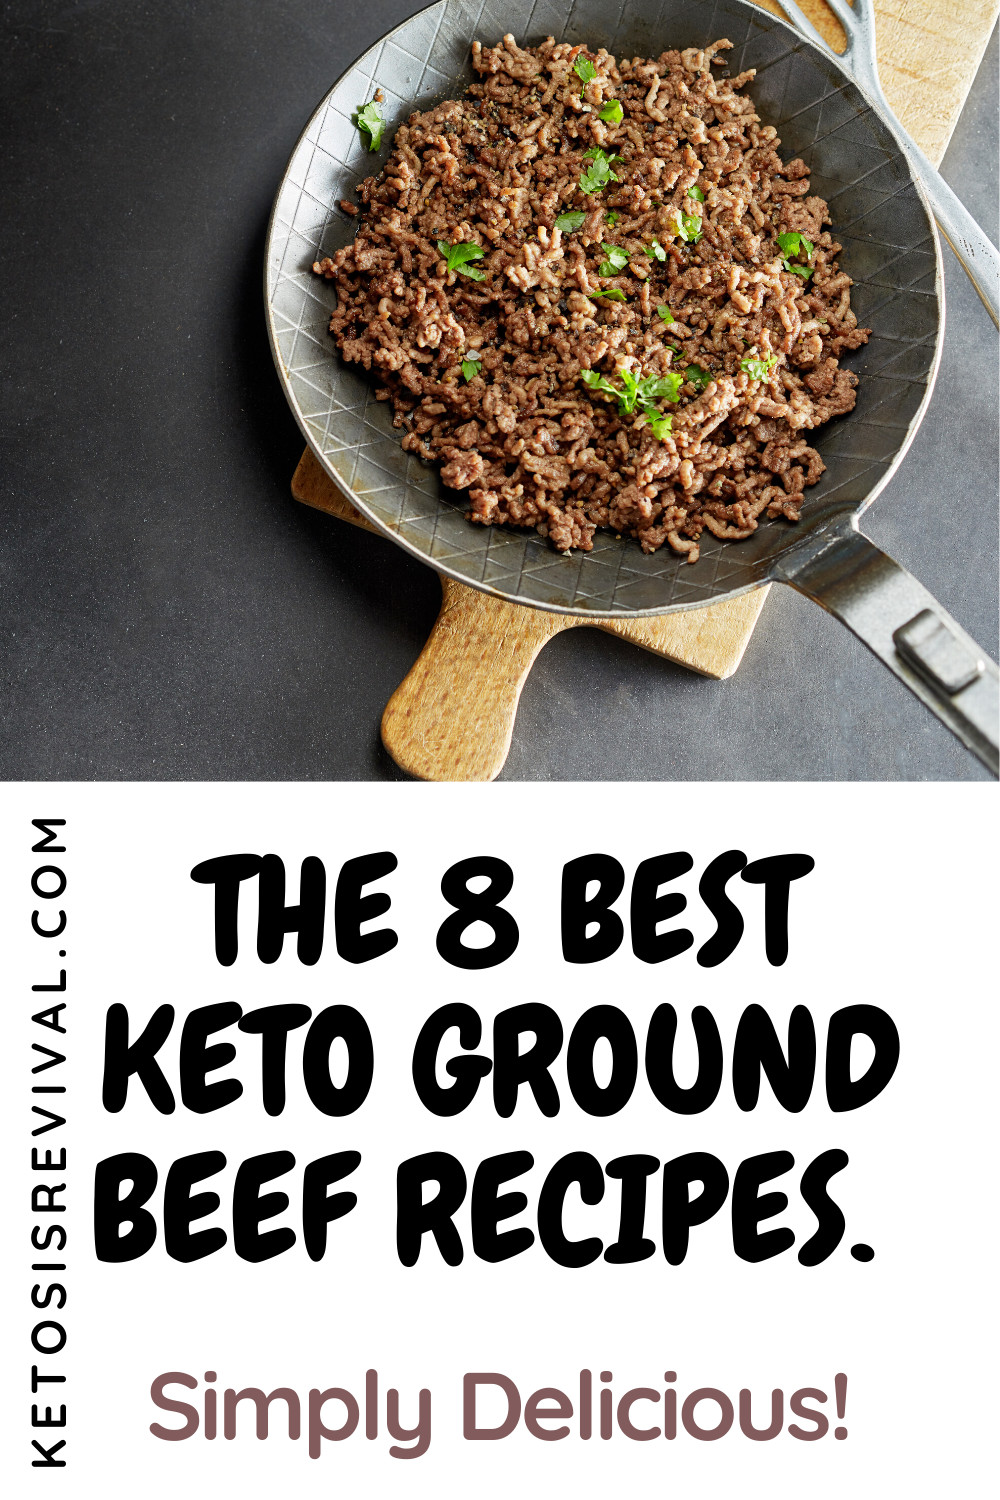 Ground Beef Appetizer Recipes
 The 8 Best Keto Ground Beef Recipes in 2020